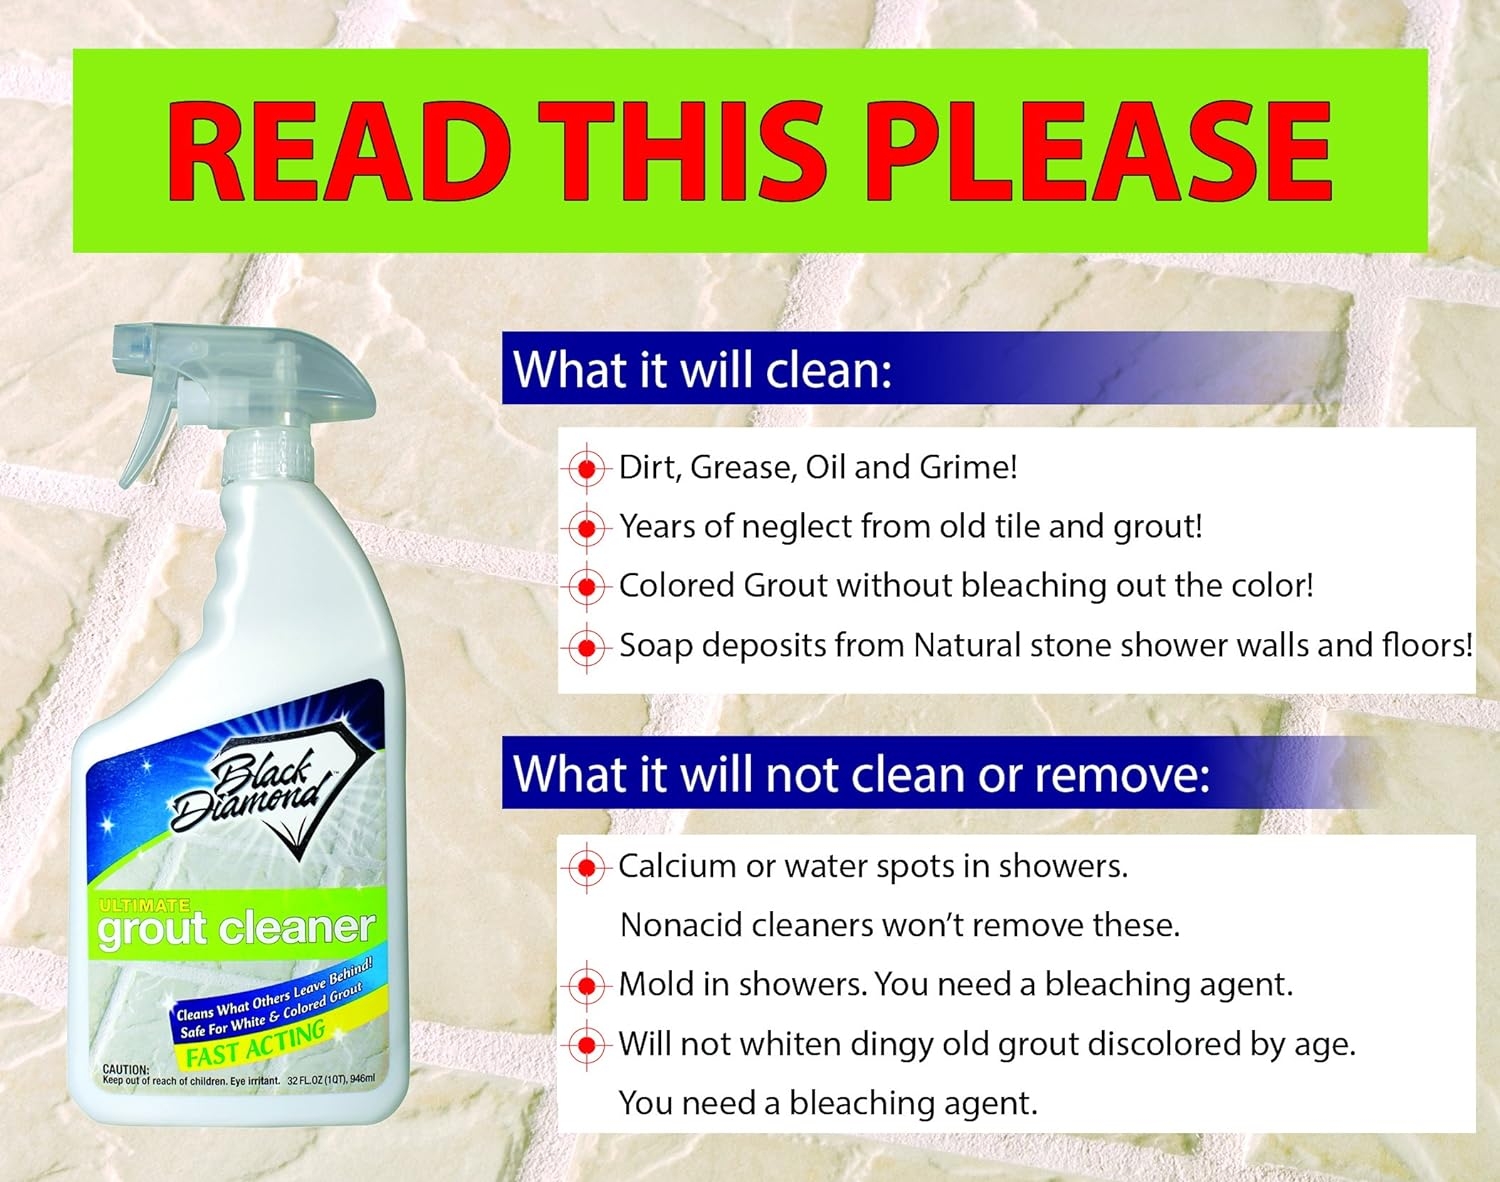 Ultimate Grout Cleaner: Best Grout Cleaner for Tile and Grout Cleaning, Acid-Free Safe Deep Cleaner & Stain Remover for Even The Dirtiest Grout, Best Way to Clean Grout in Ceramic, Marble. Gallon